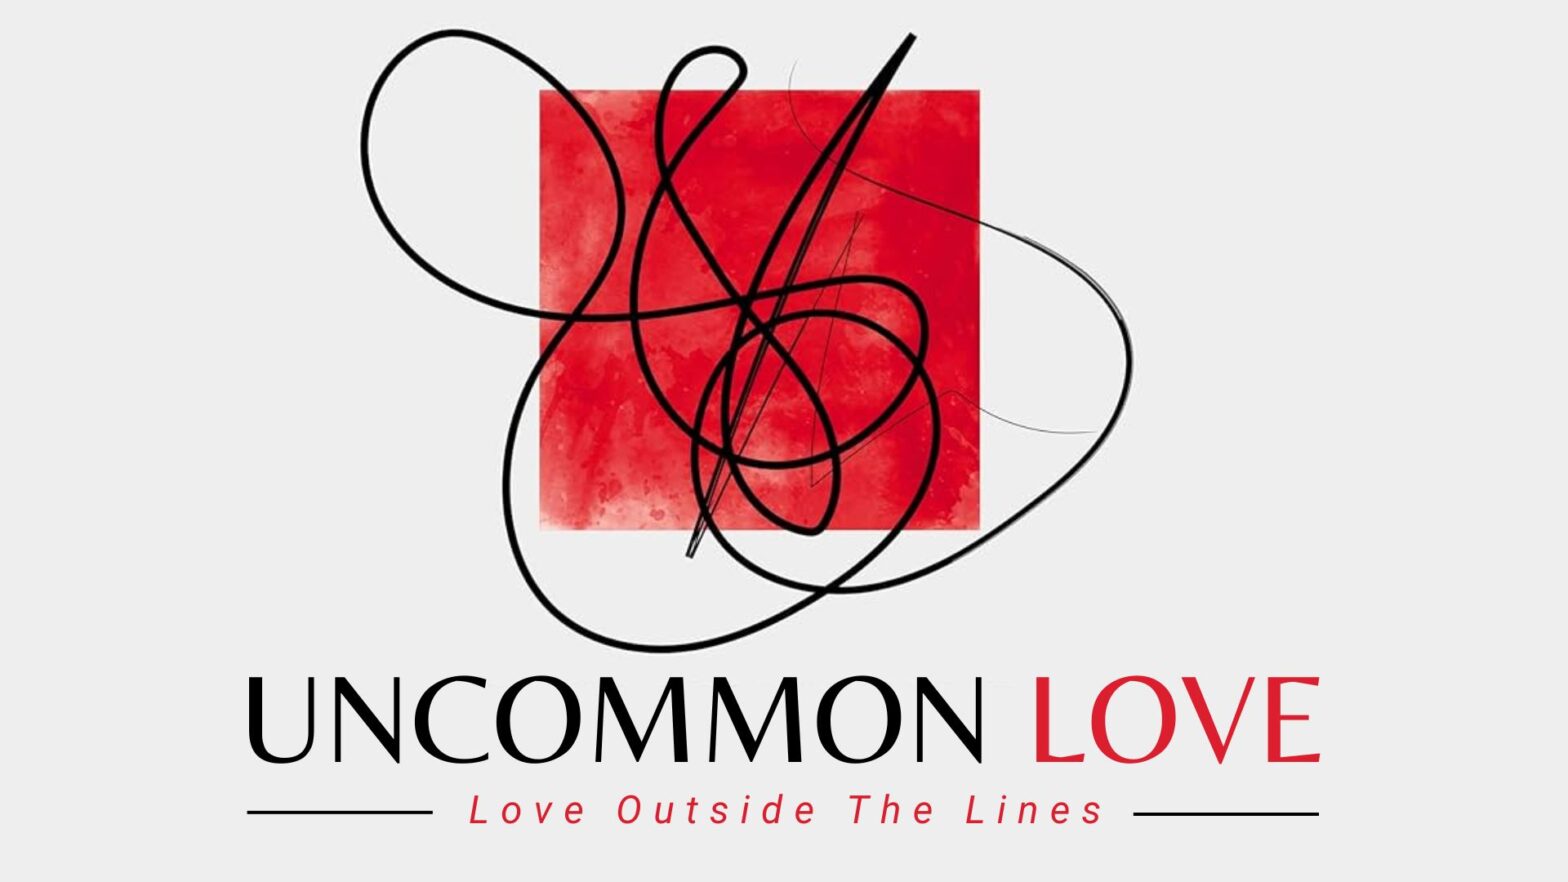 Uncommon Love (Love Outside The Lines) Pt. 2